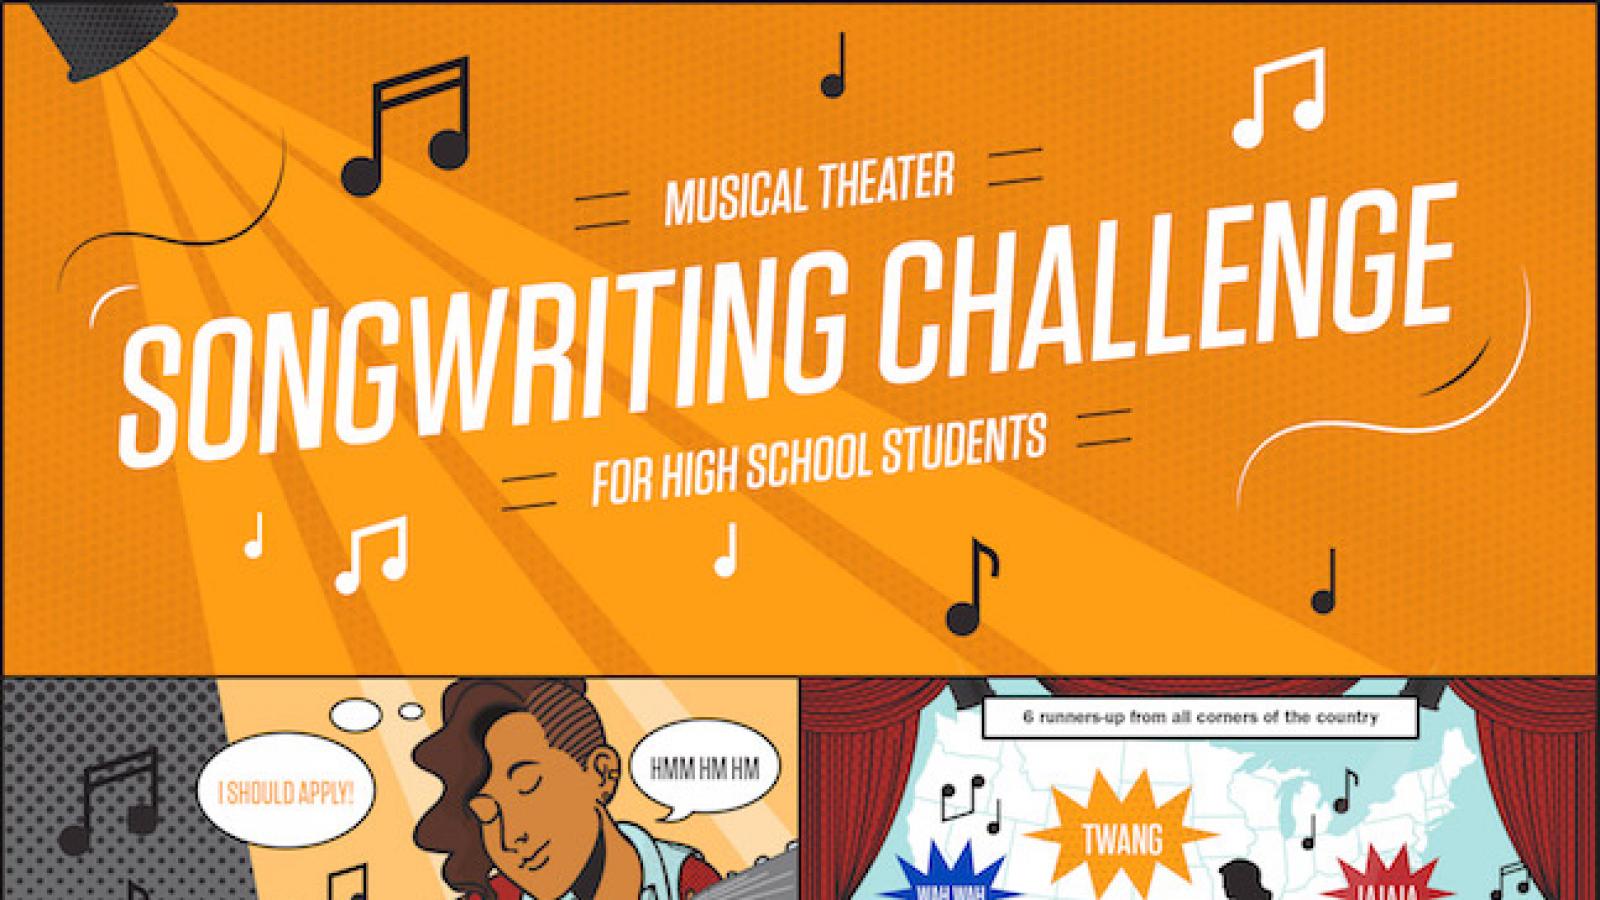 an infographic about the songwriting challenge please see transcript for accessible text and description